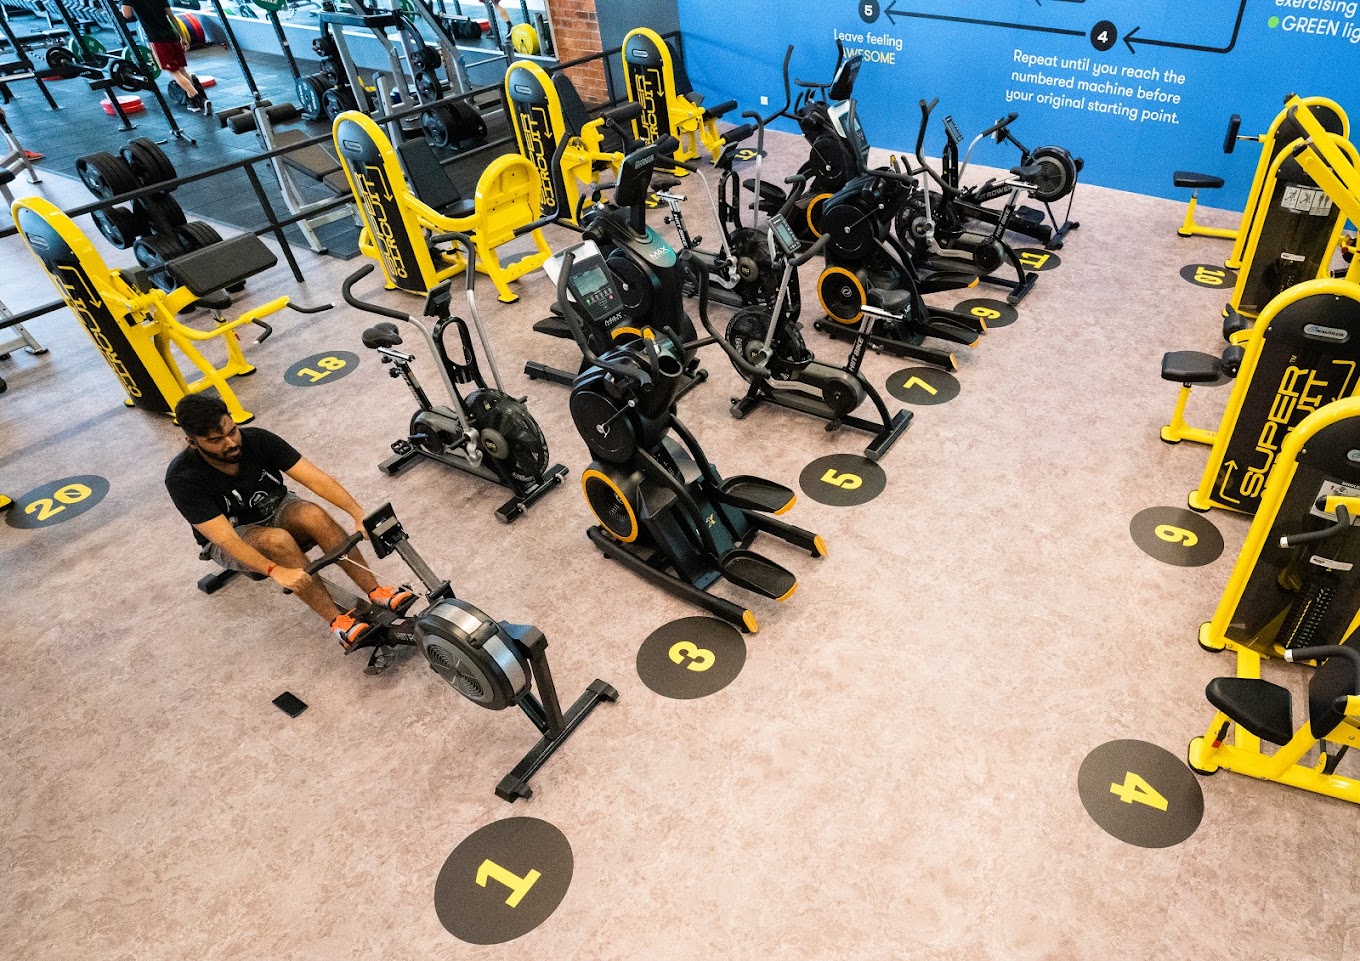 24-Hour Gyms In Singapore - HIIT zone called SuperCircuit